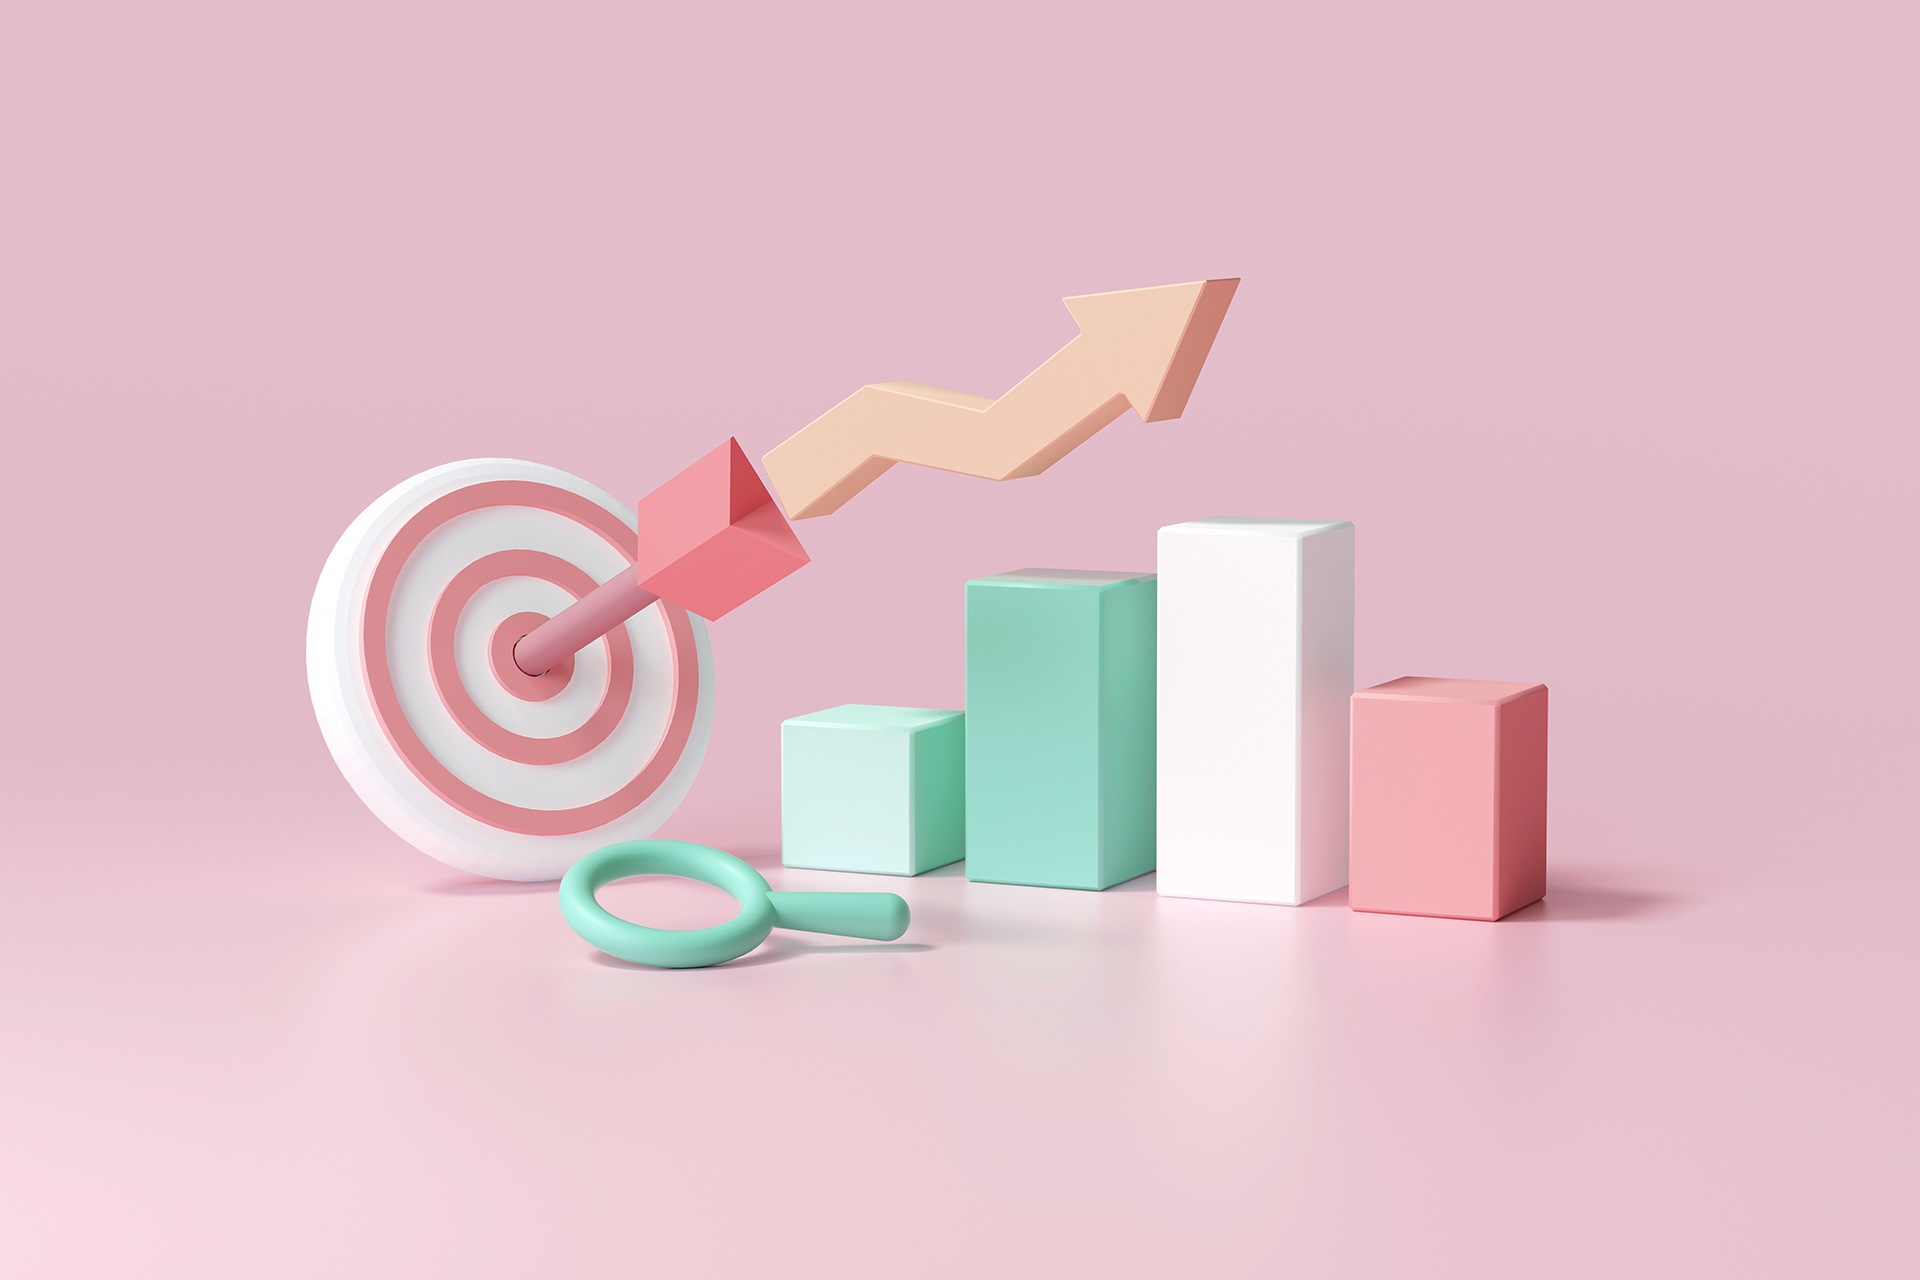 A collection of objects, like a bullseye target, bar chart and magnifying glass, that are meant to represent social media marketing metrics small businesses could evaluate